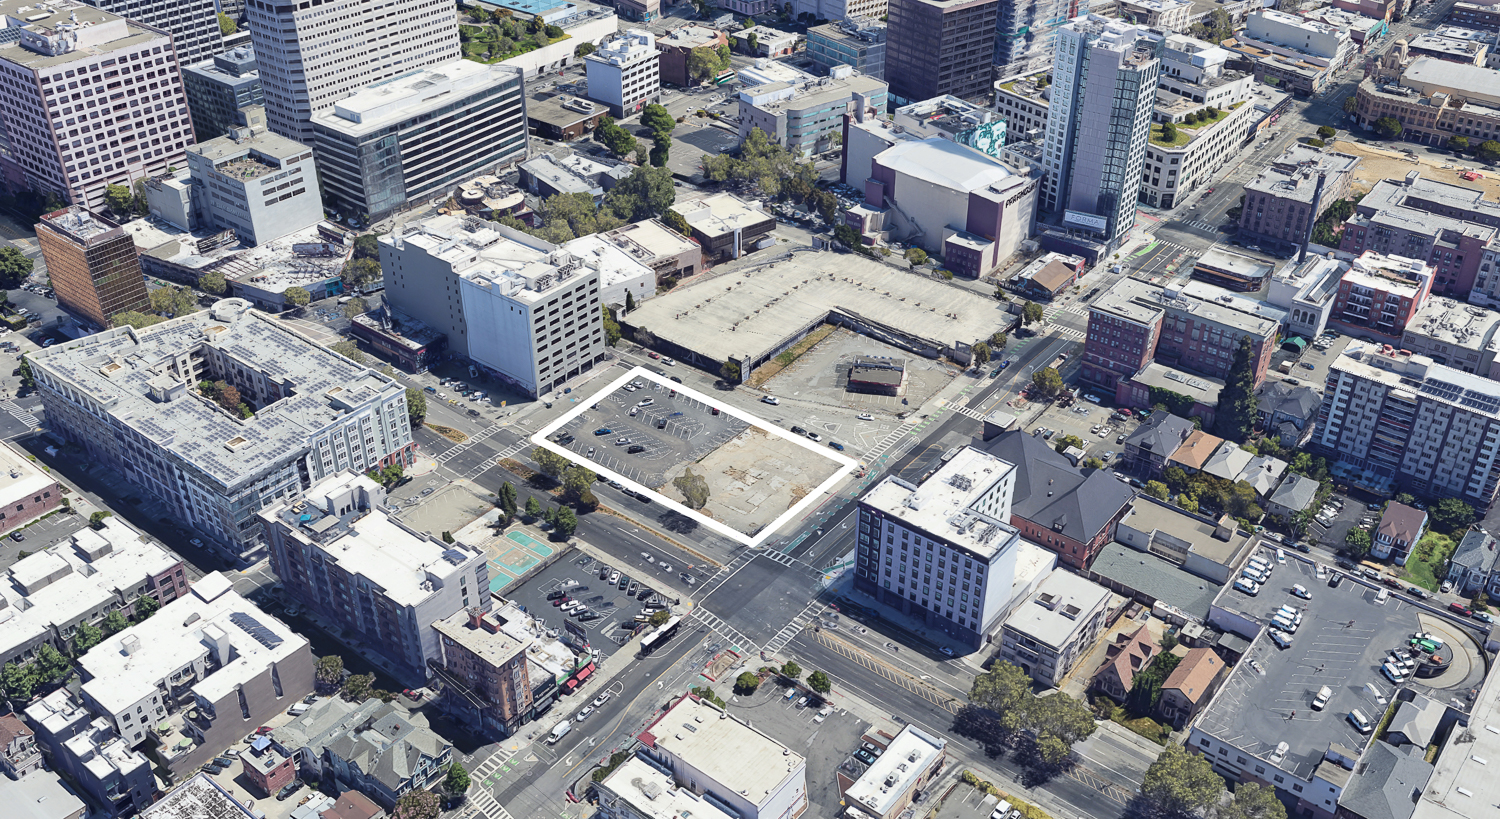 2201 Valley Street outlined approximately by YIMBY, image via Google Satellite